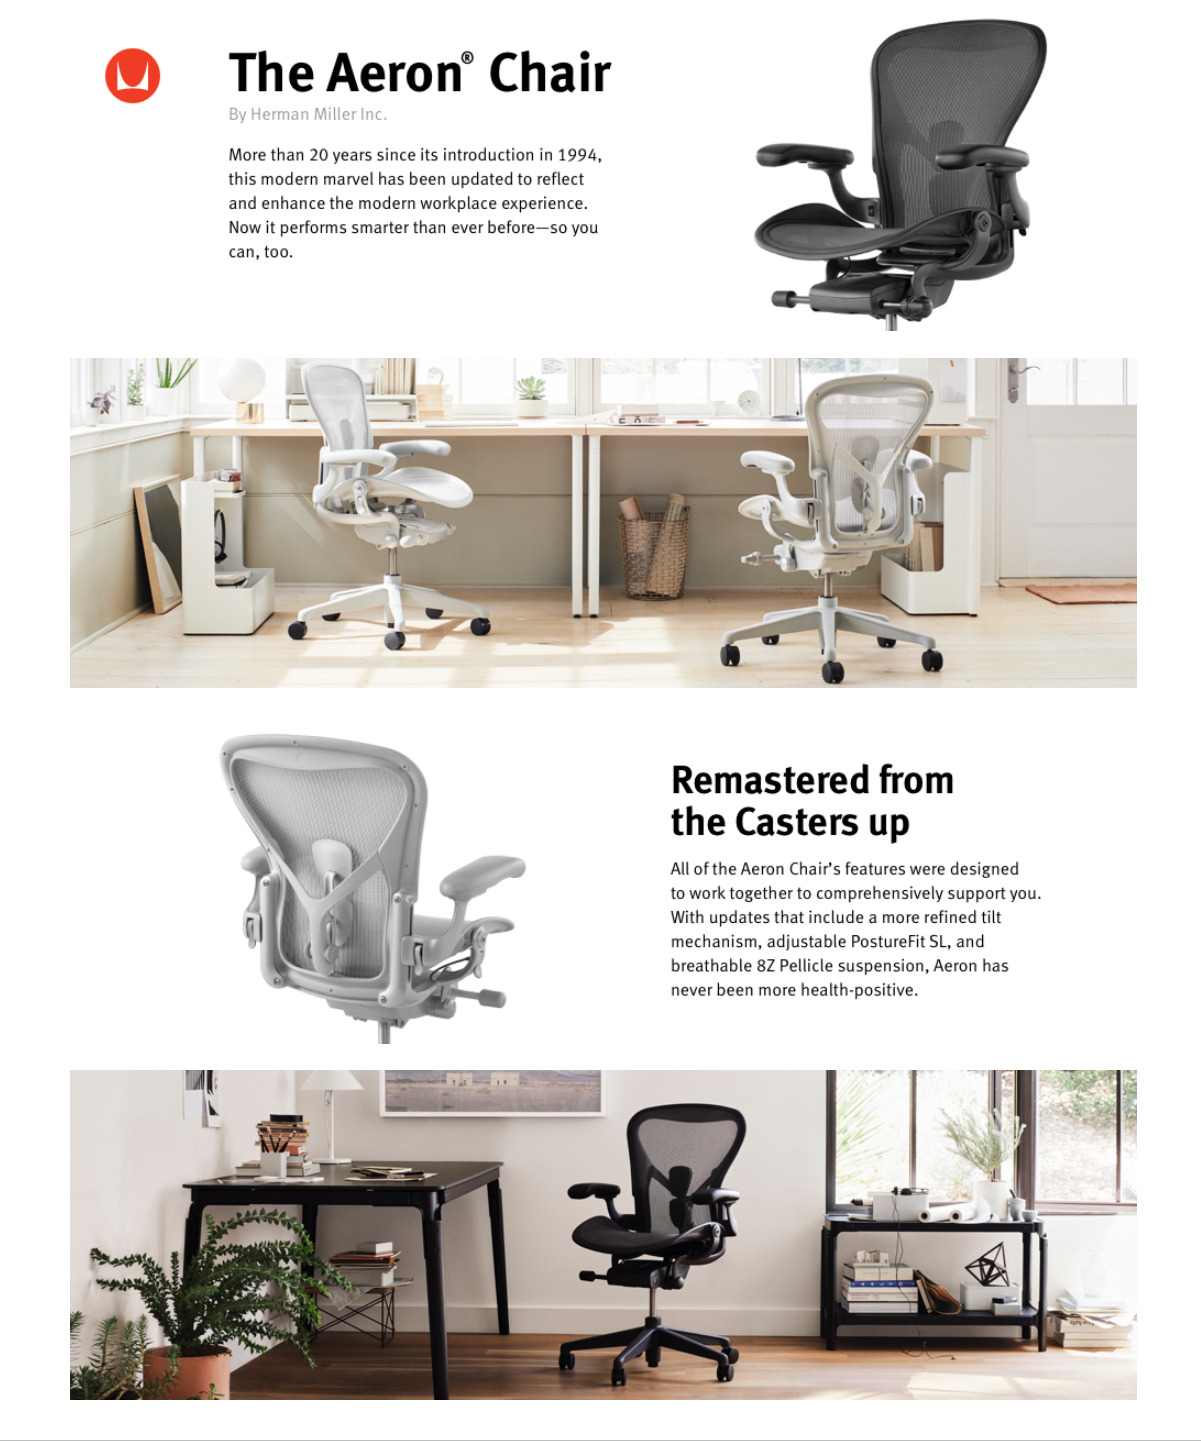 Herman Miller Aeron infographic from the manufacturer